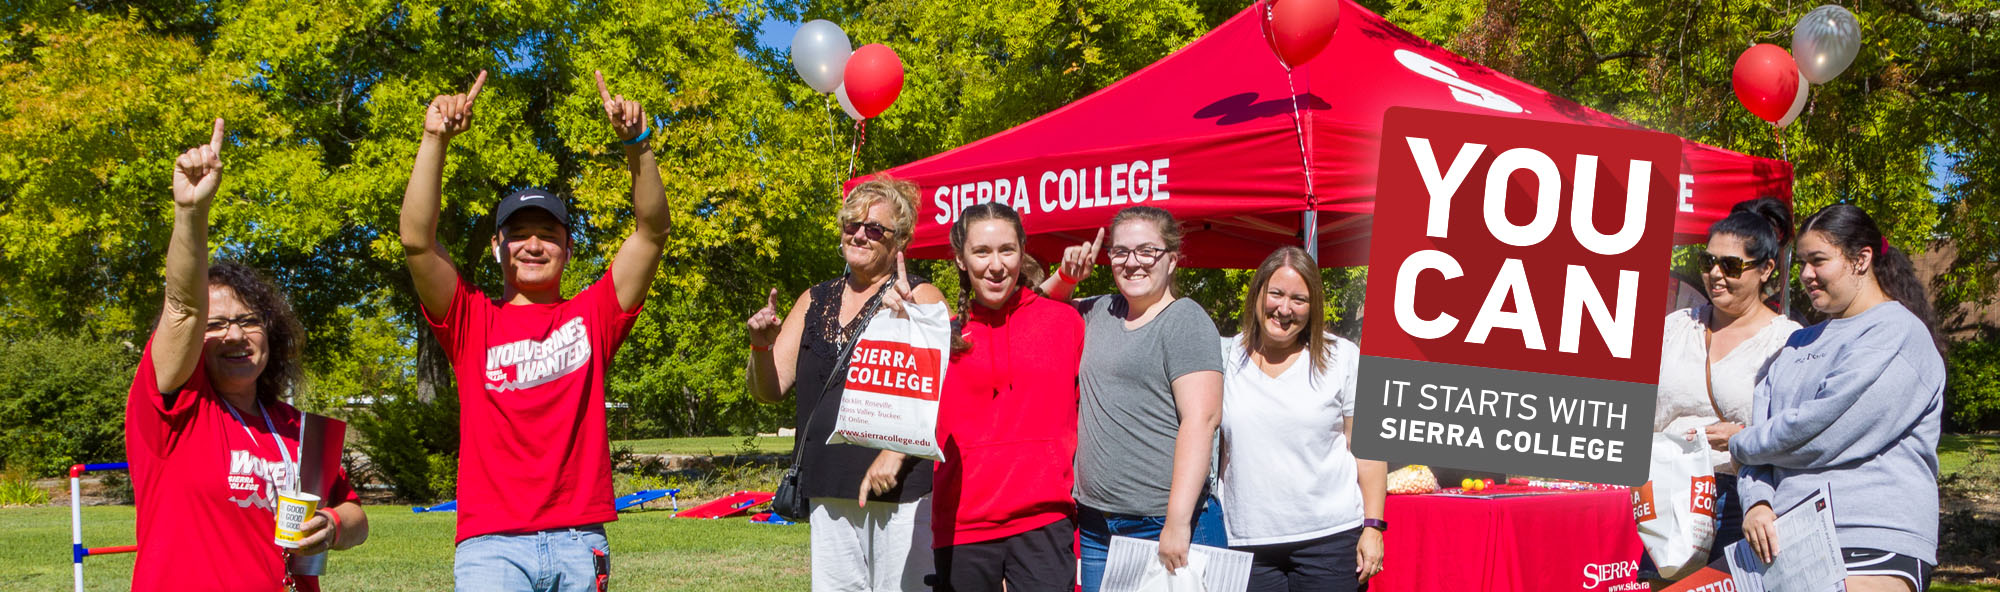 You Can: It Starts with Sierra College